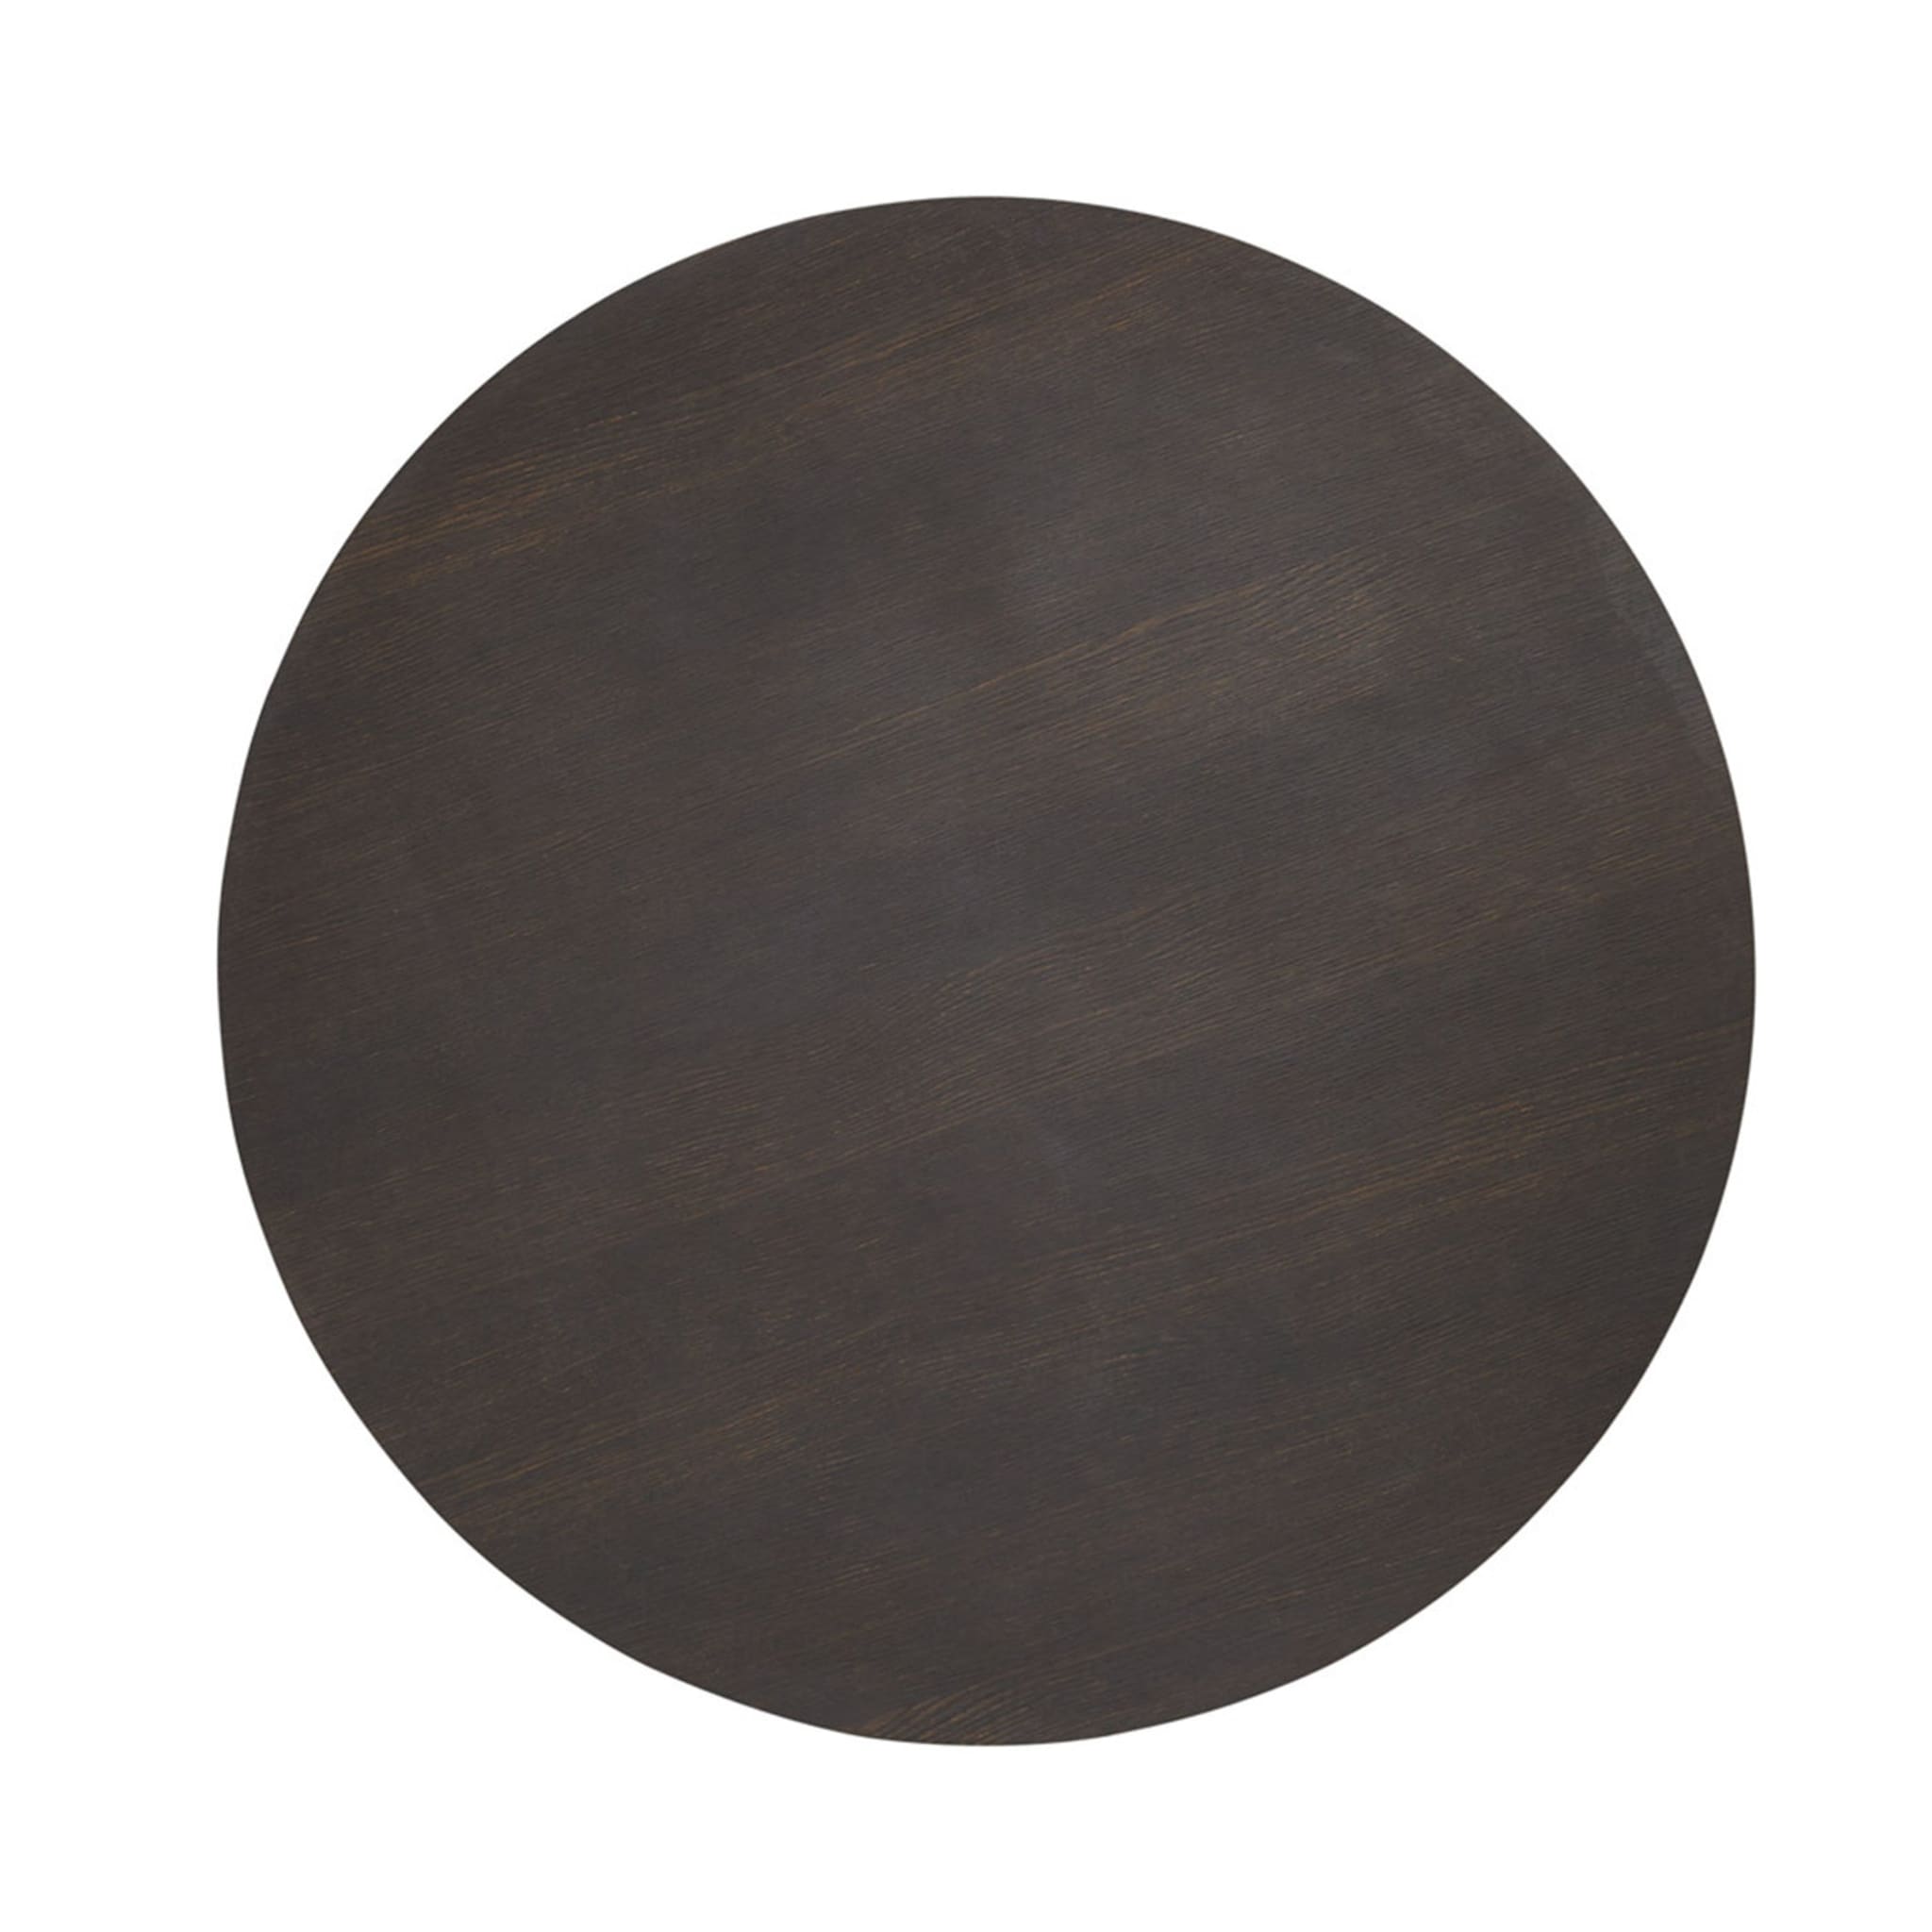 Ottocento Black and Wenge Large Table by Paola Navone - Alternative view 1